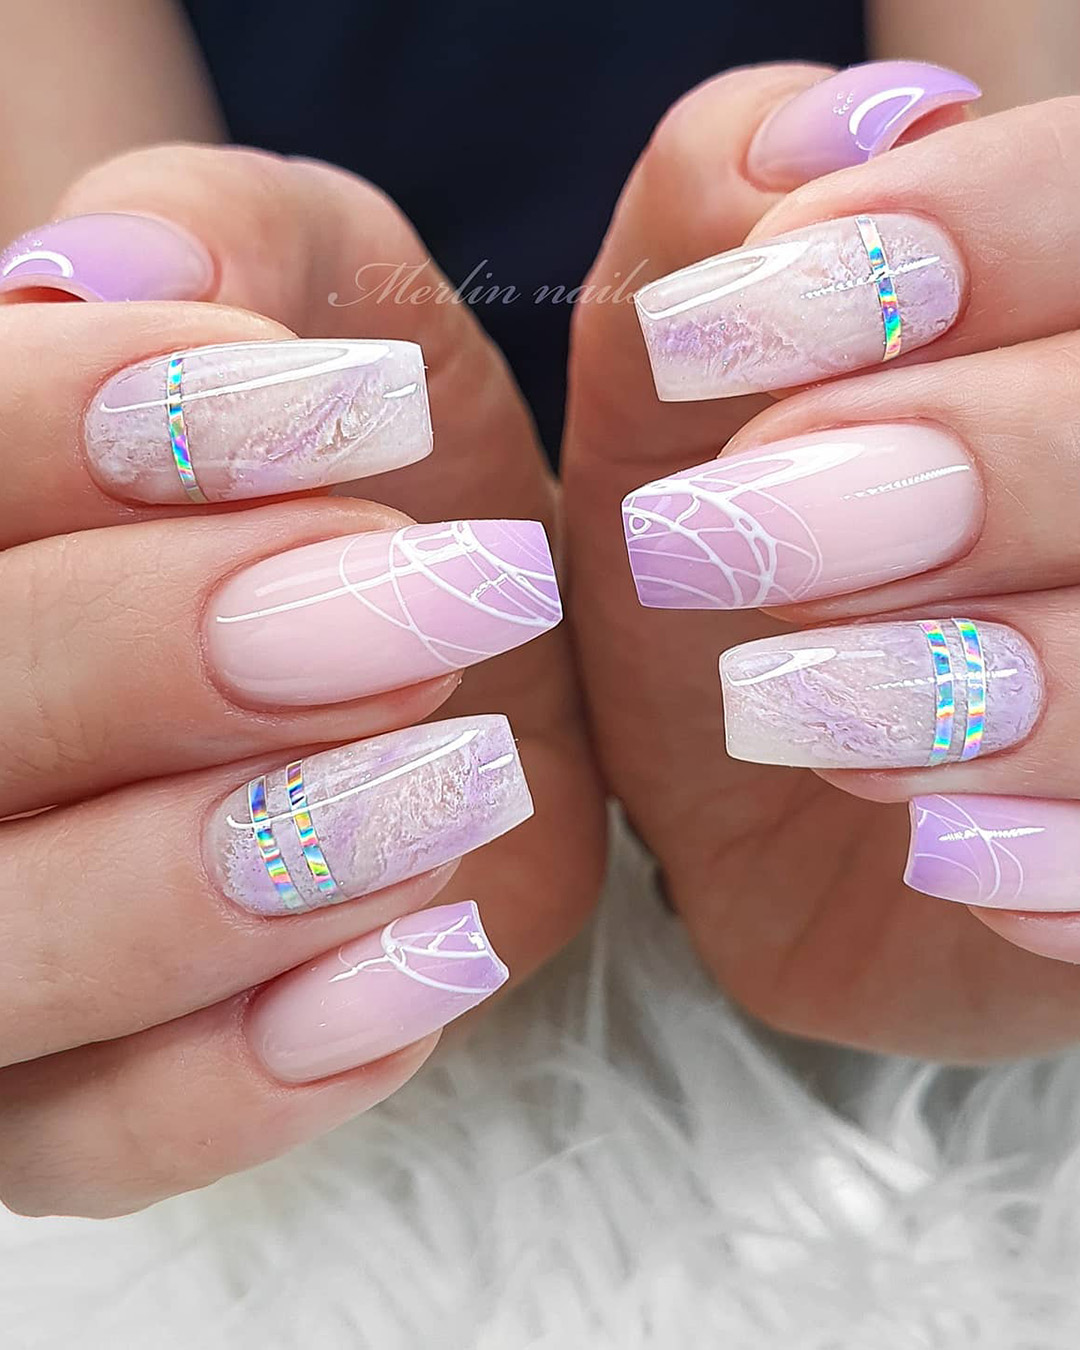 pink and white nails wedding ombre merlin_nails